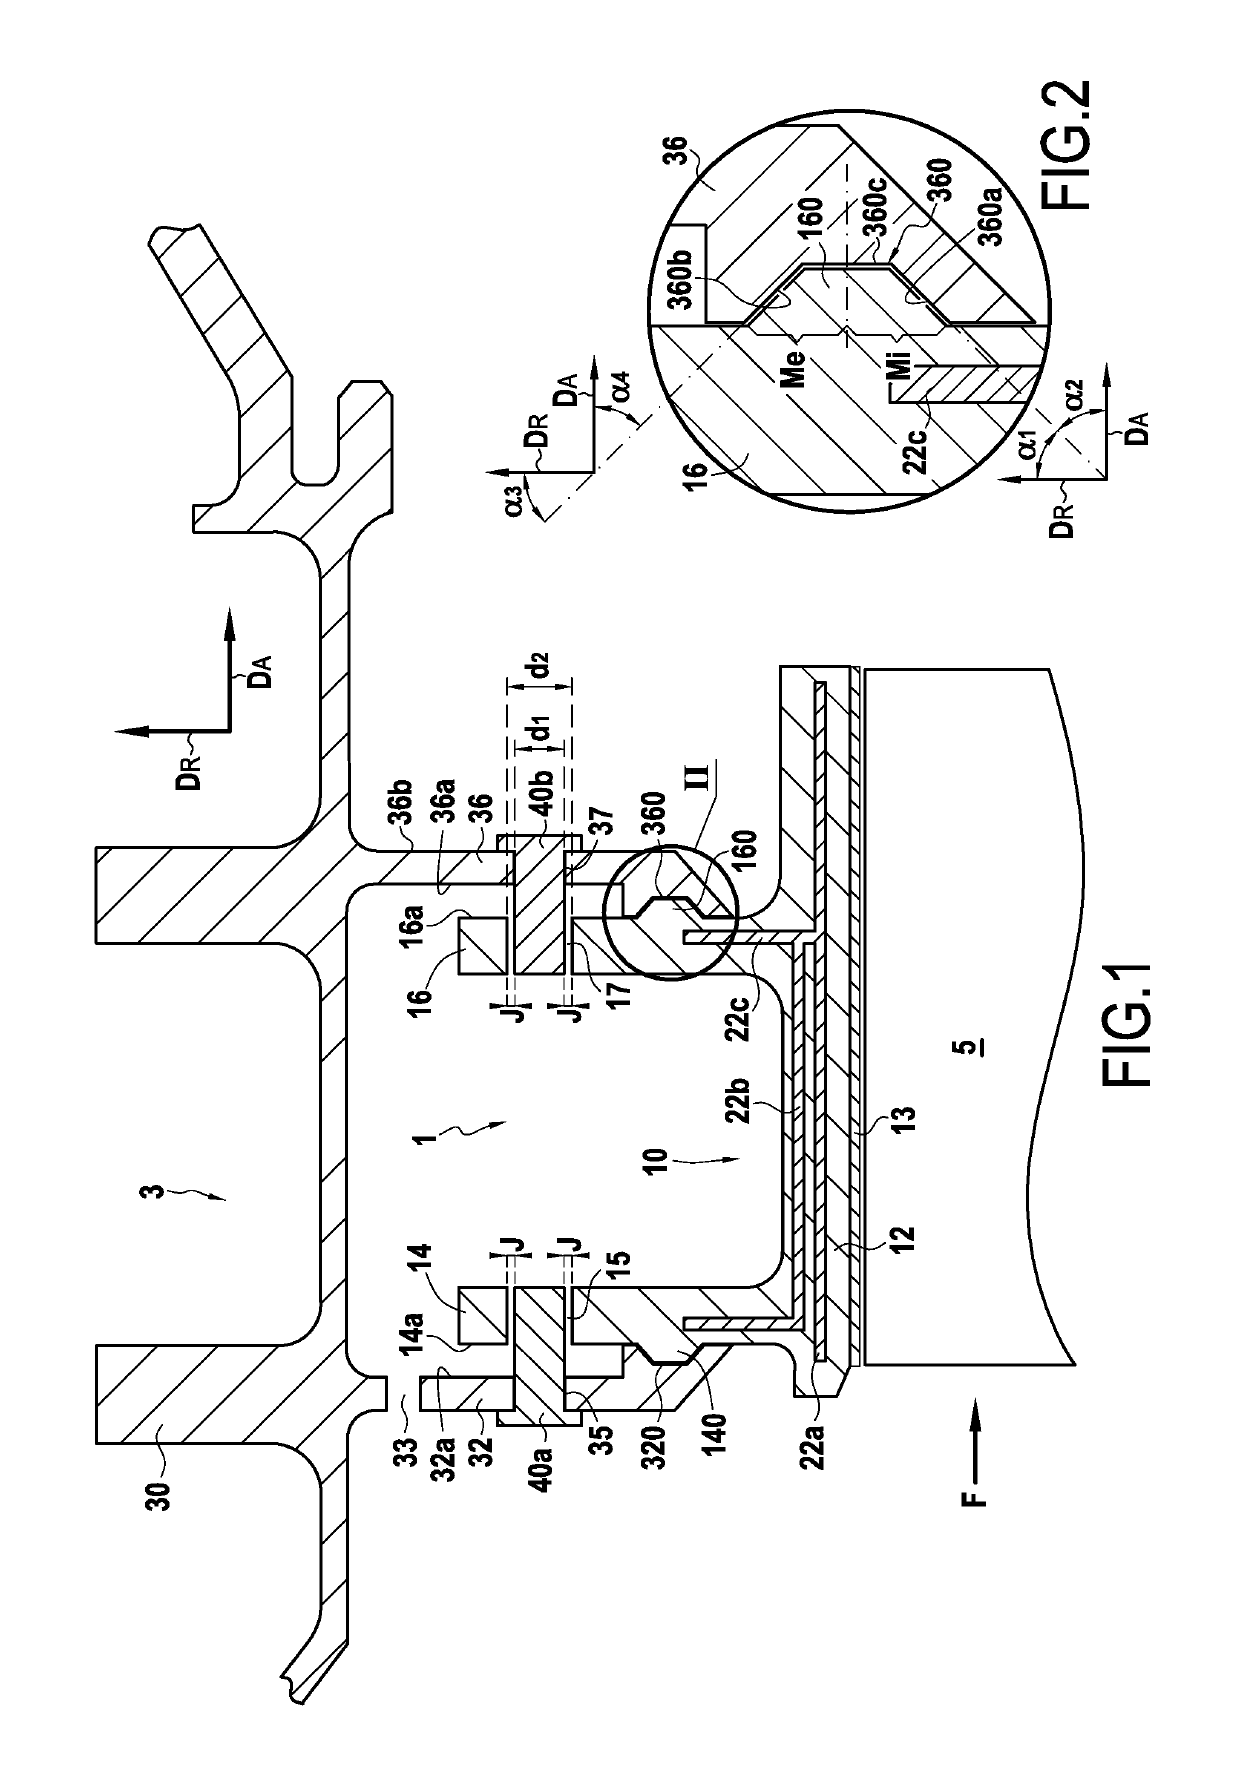 Turbine ring assembly with support when cold and when hot